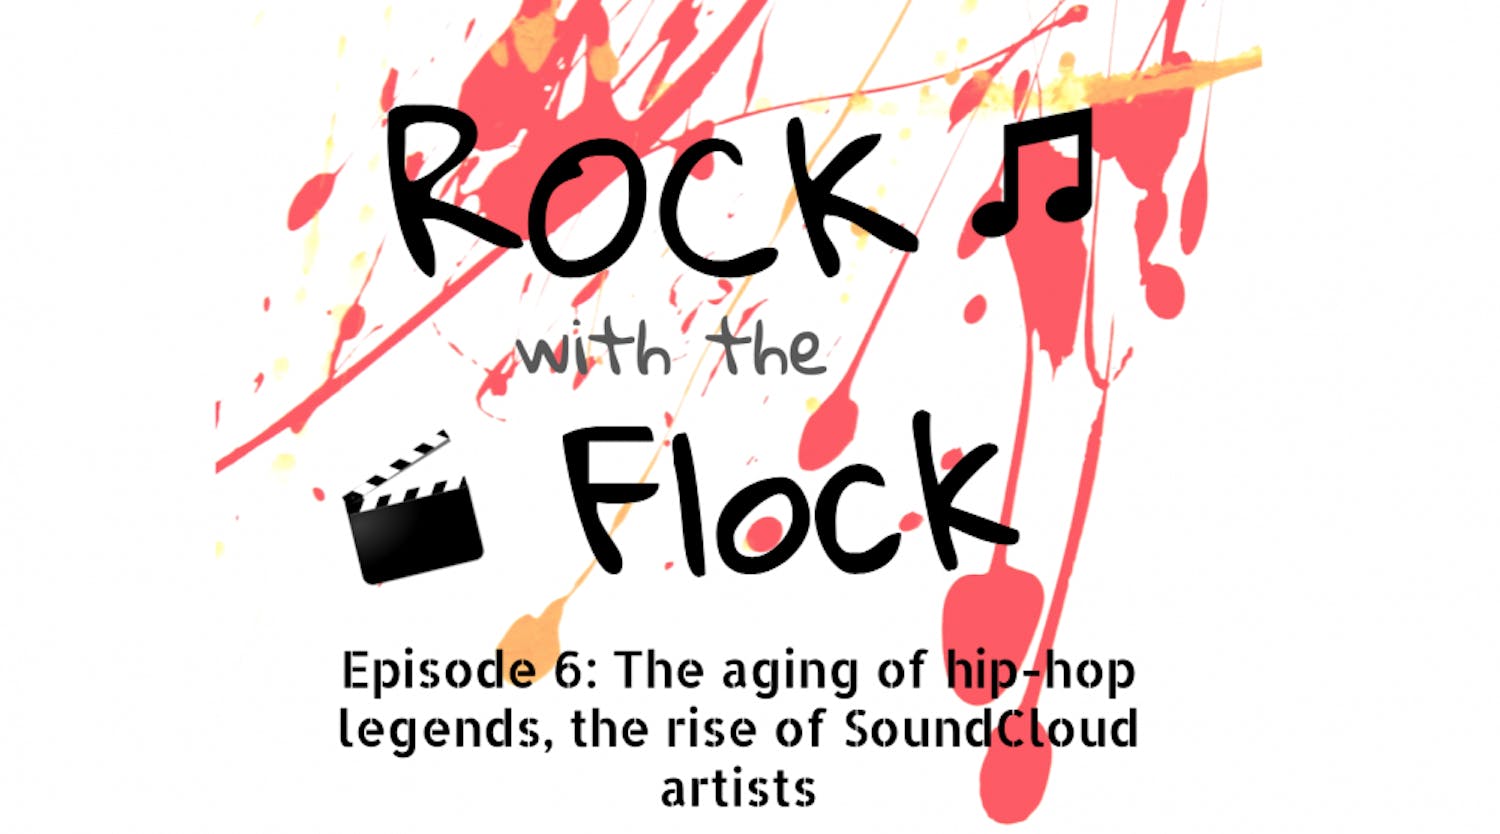 Catch new episodes of Rock with the Flock every Wednesday at 7 p.m.